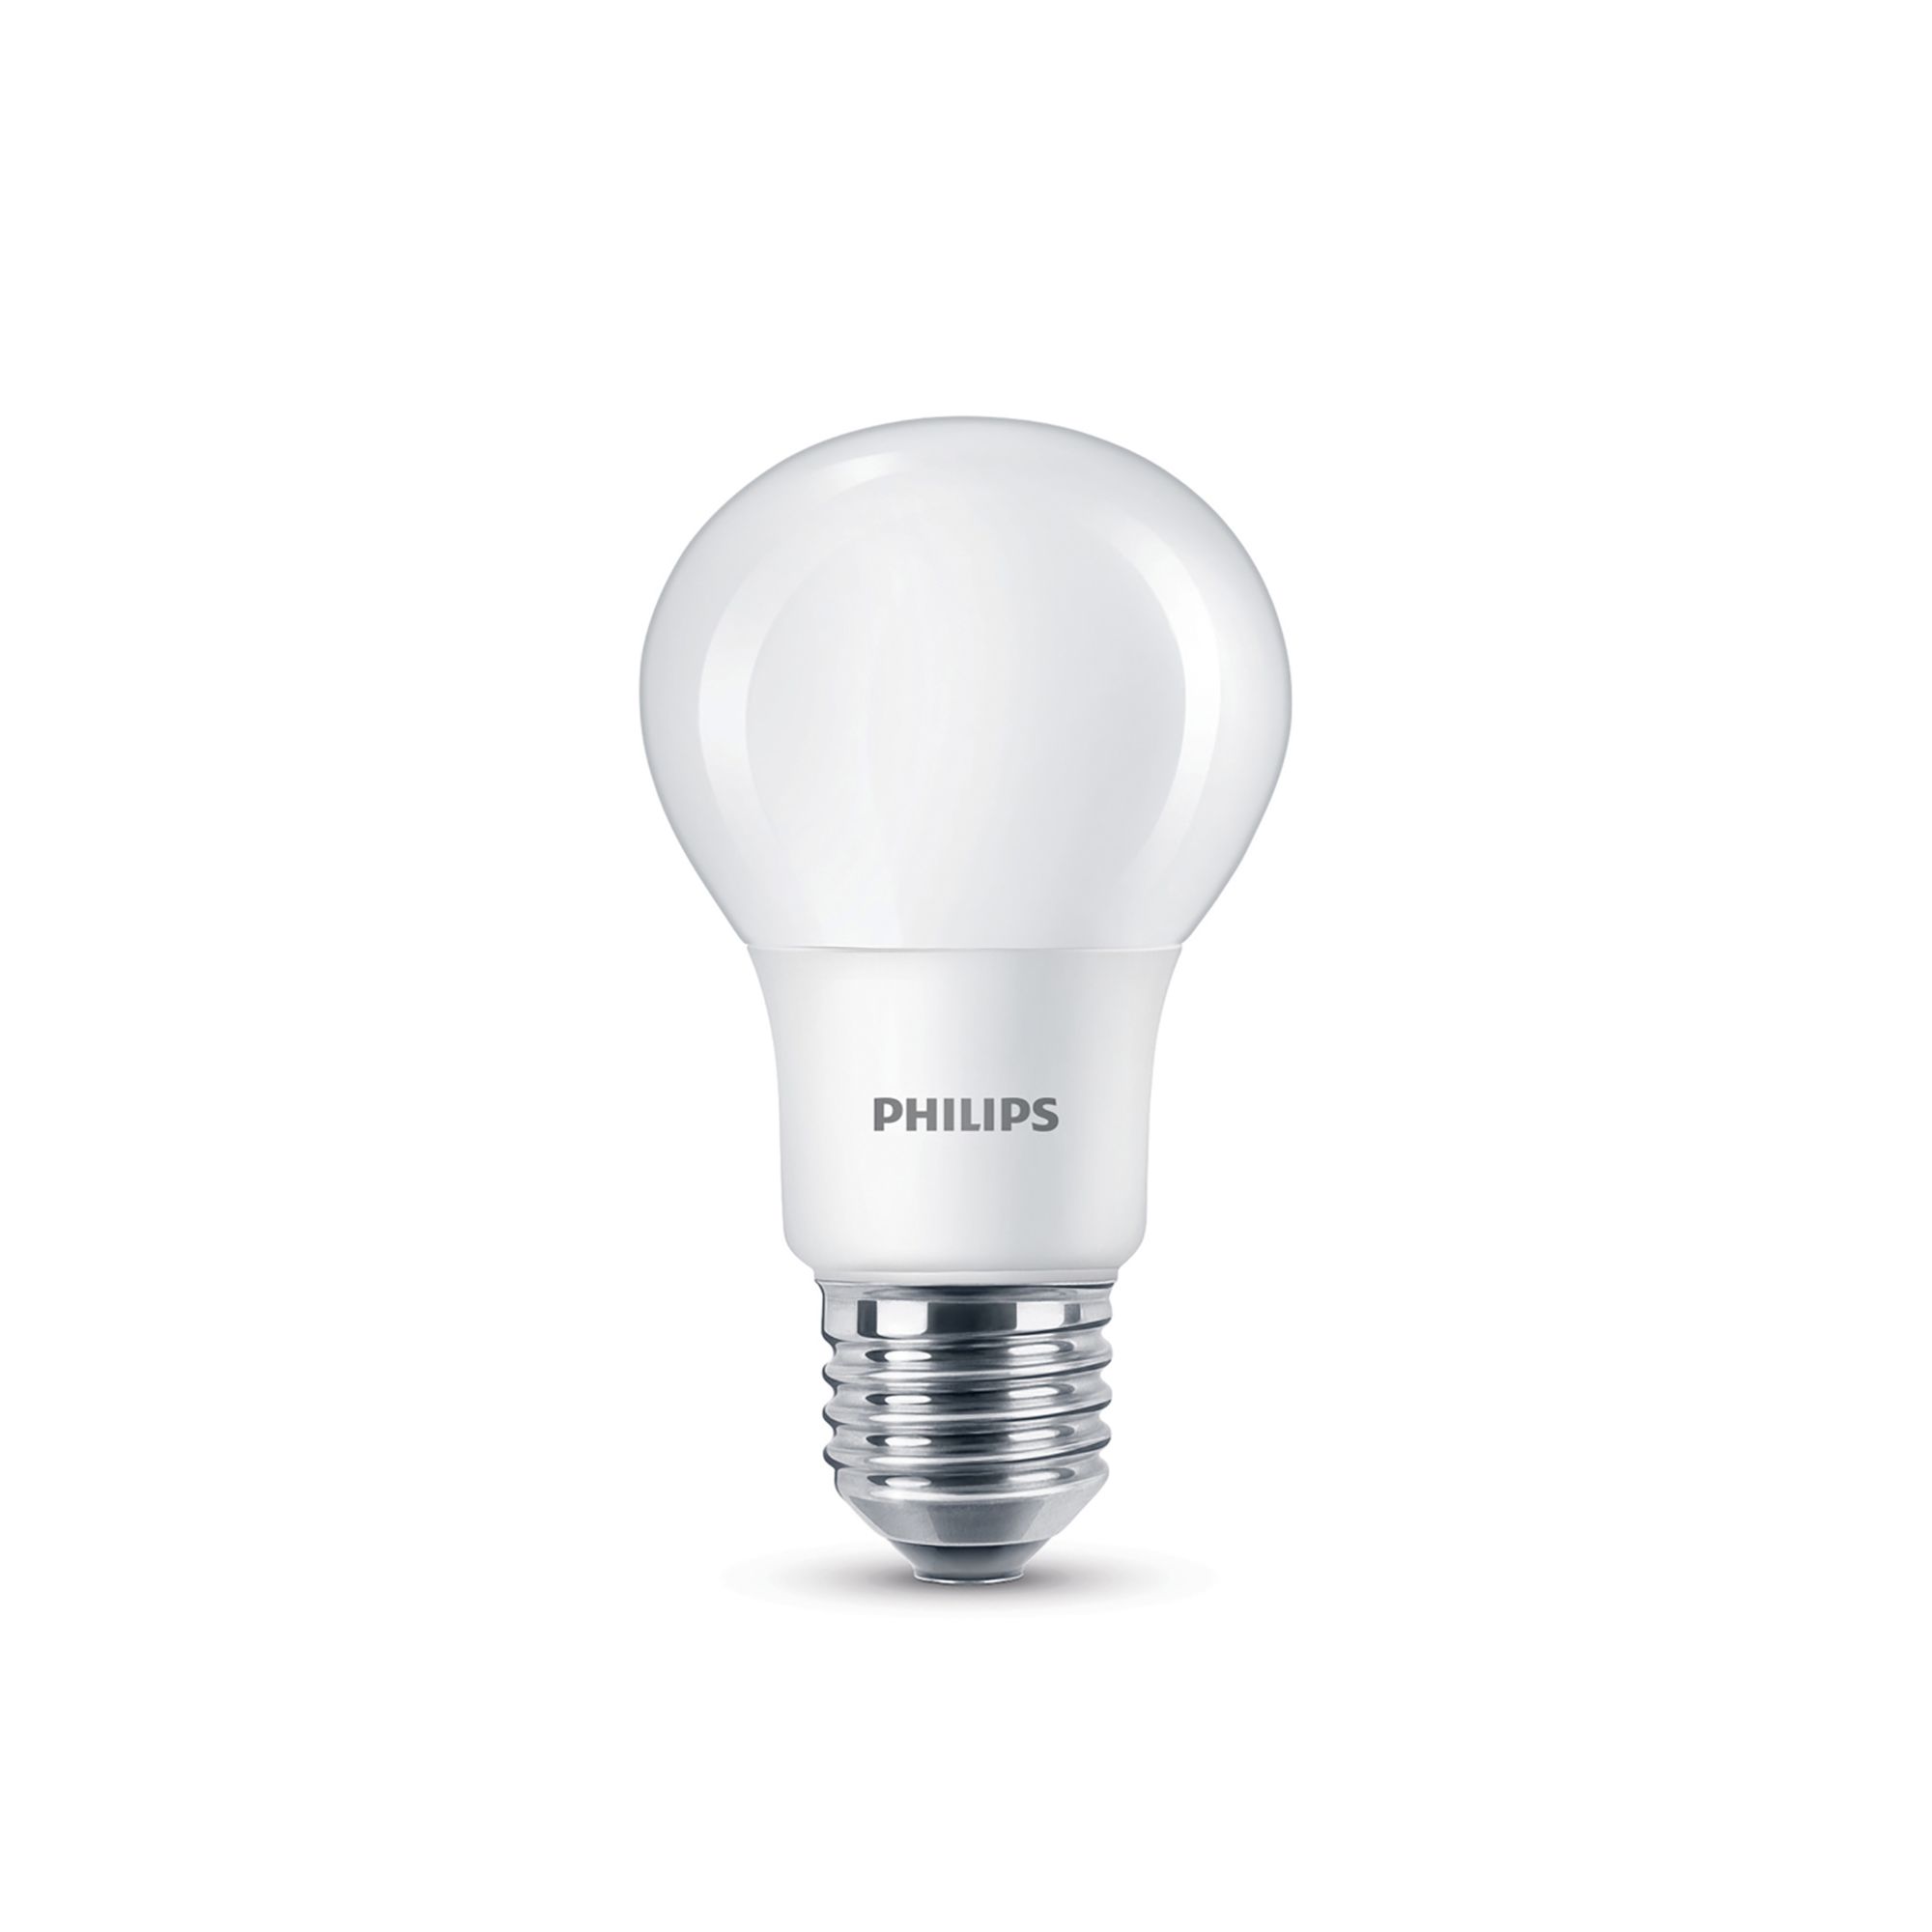 Philips Classic 5W 470lm Frosted A60 Warm white & neutral white LED Dimmable Light bulb